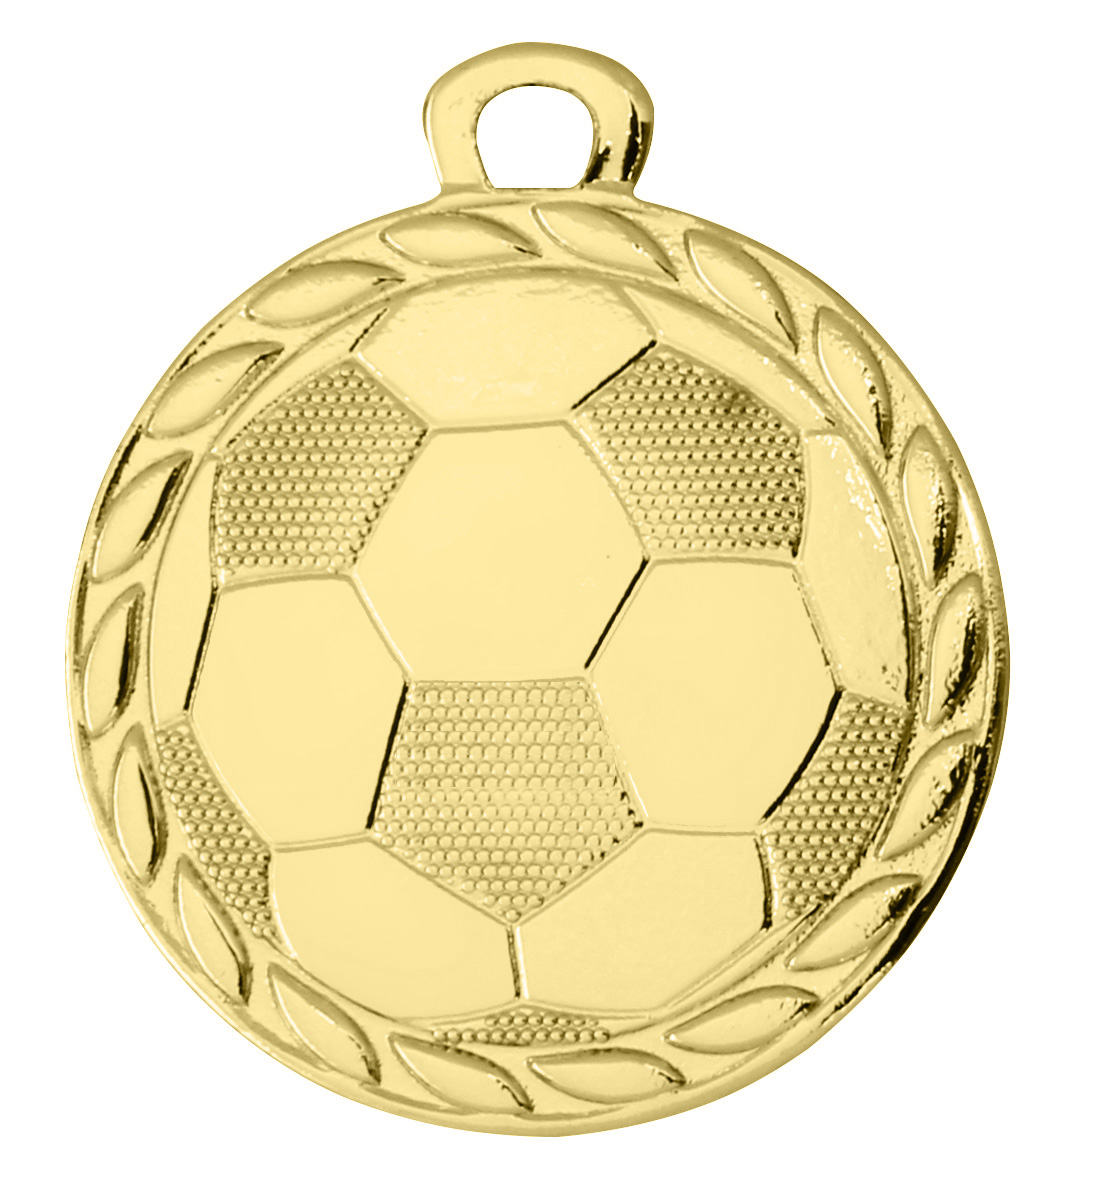 Pack of 100 Gold Football Medals with Ribbons & Text Labels (32mm) - DI3202/SET100